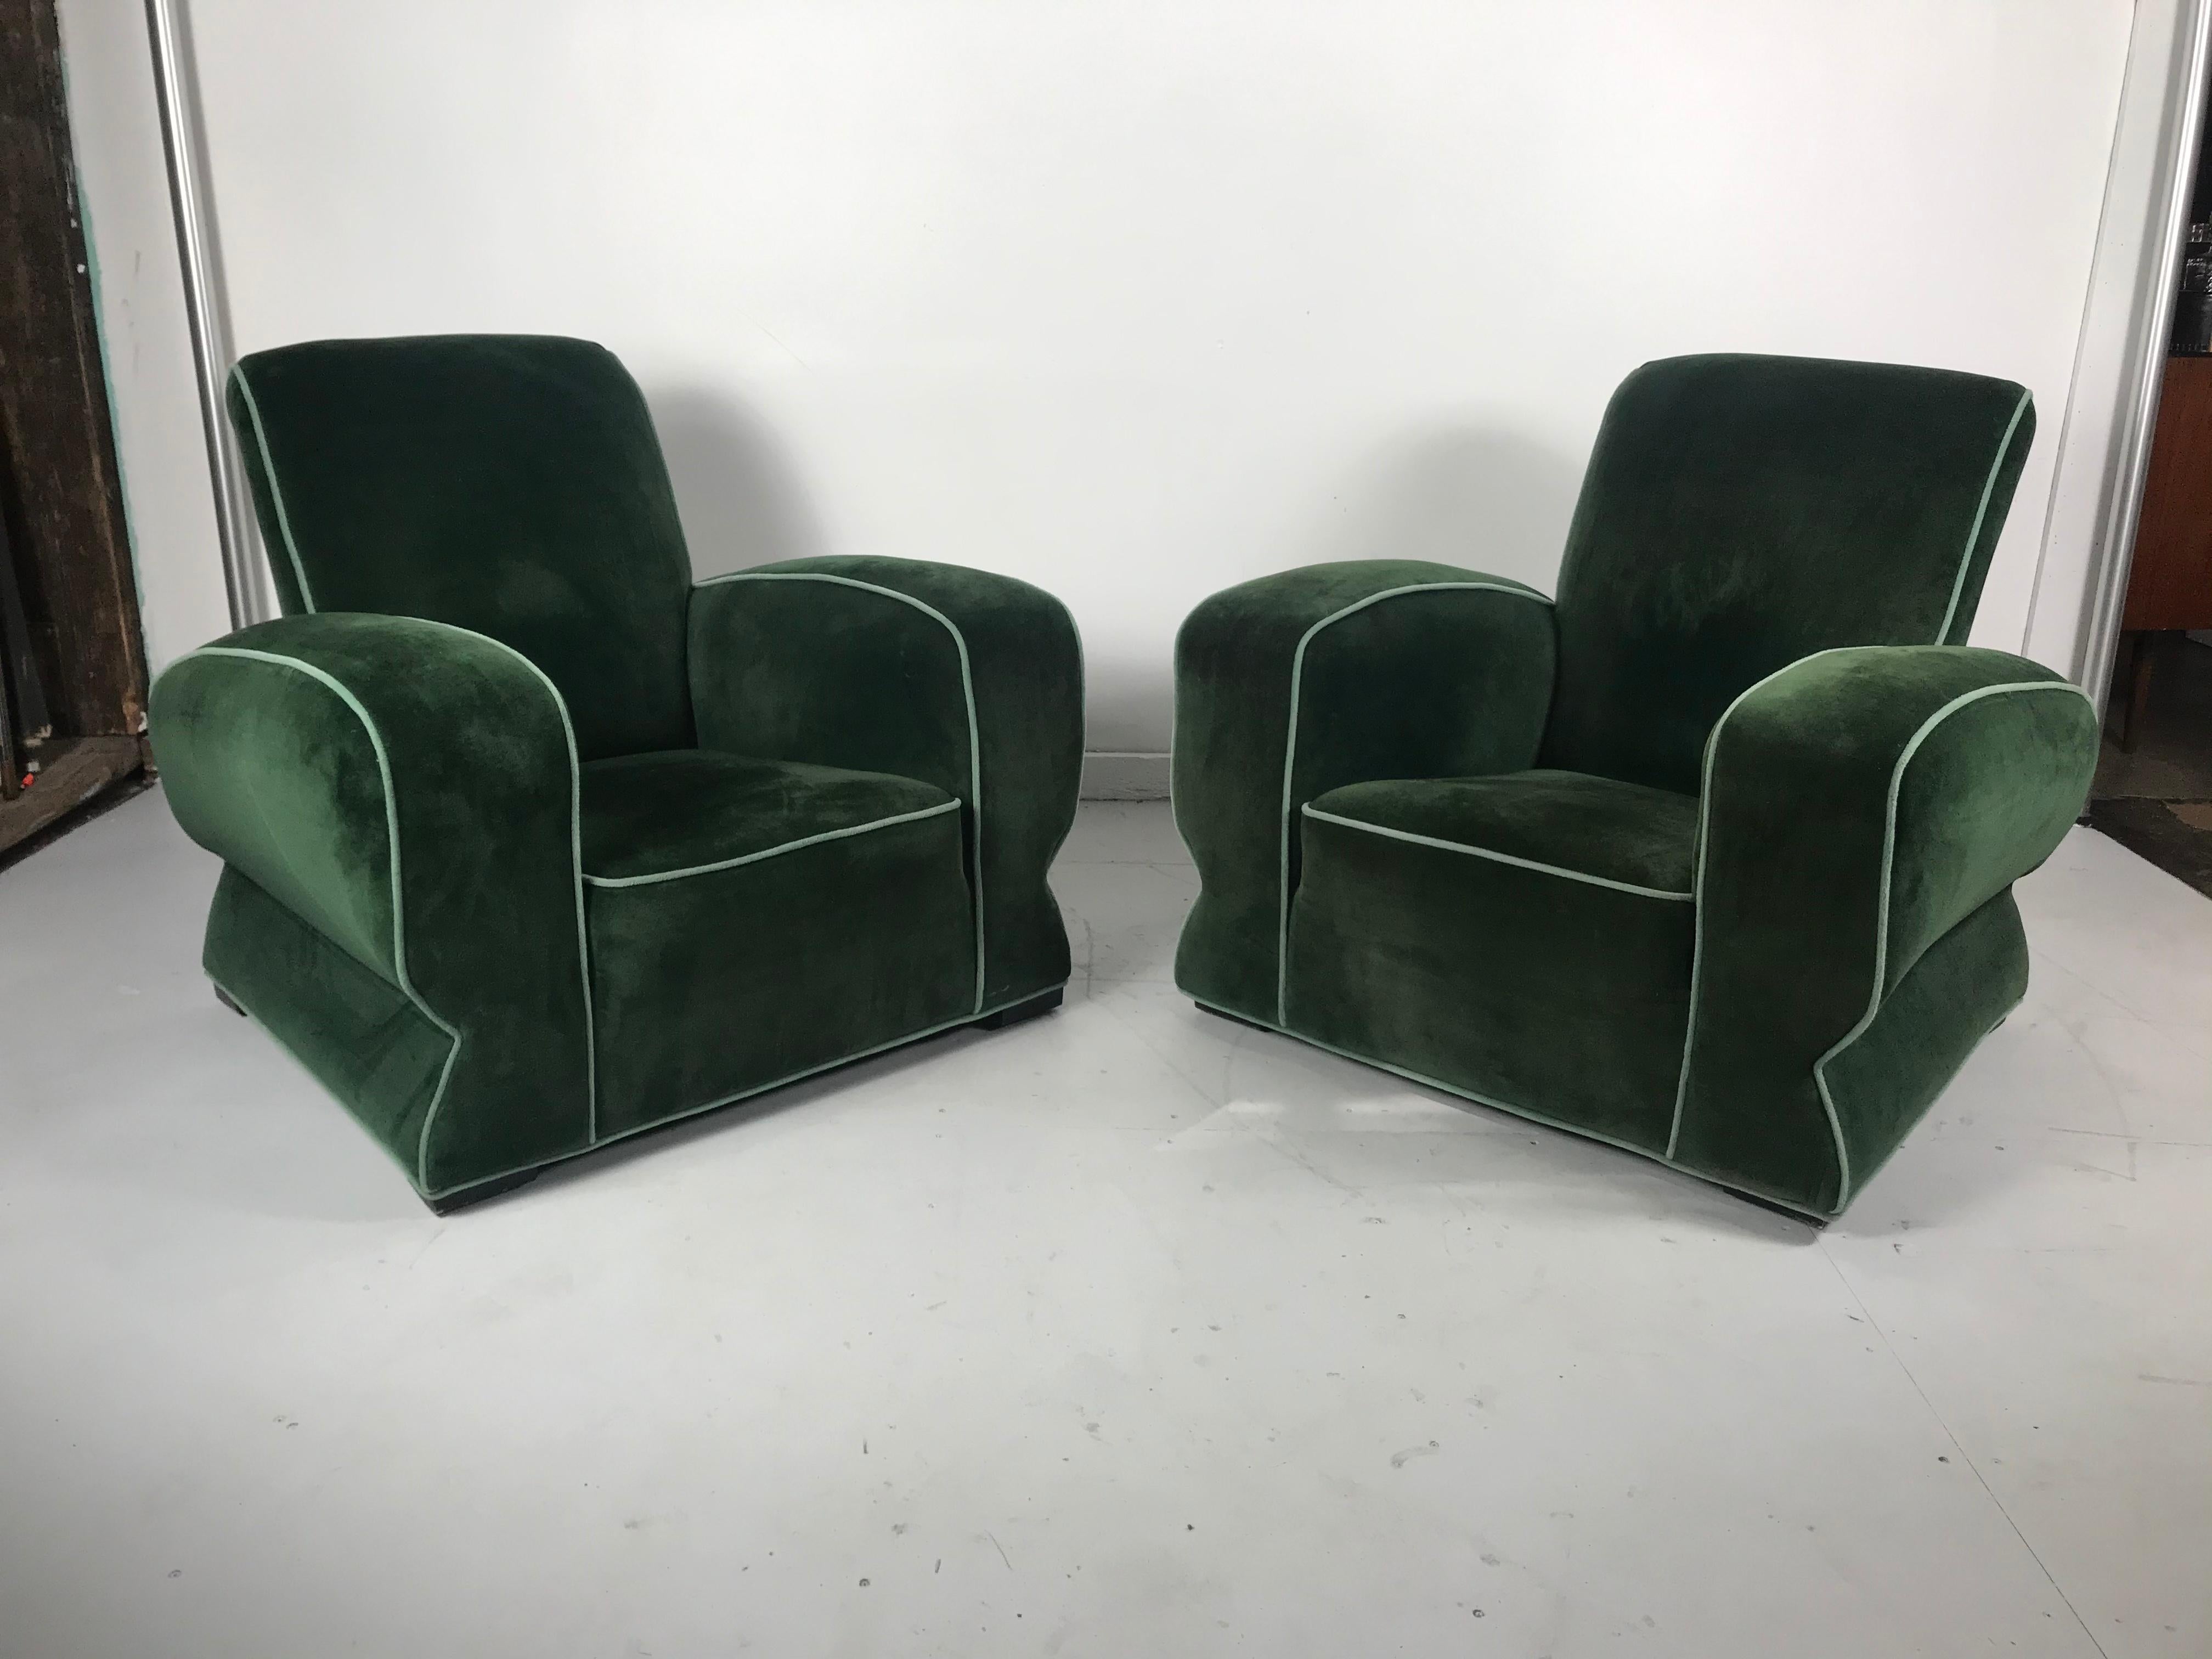 Stunning pair of Art Deco club. Lounge chairs, streamline modernist design 1930s, recently reupholstered in emerald green velvet with ice blue piping. Look amazing from any angle. Extremely comfortable, would fit seamlessly into any modern,